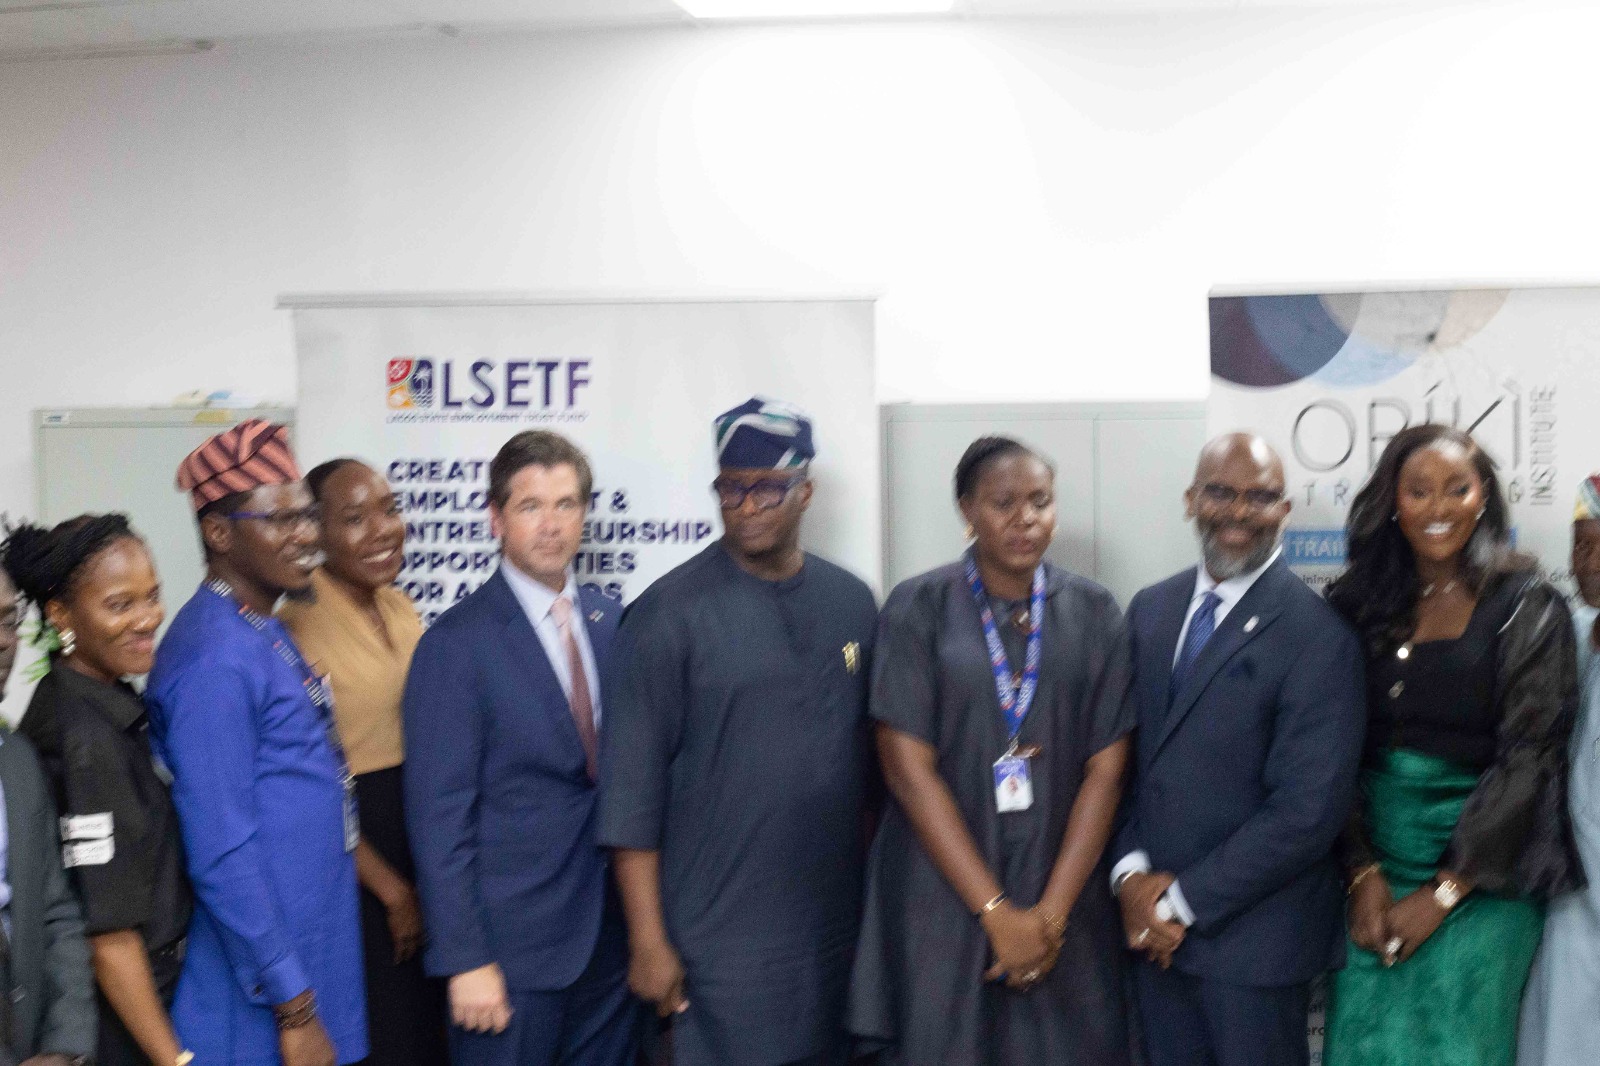 LSETF, USADF, and Oriki Group representatives at the deal signing event